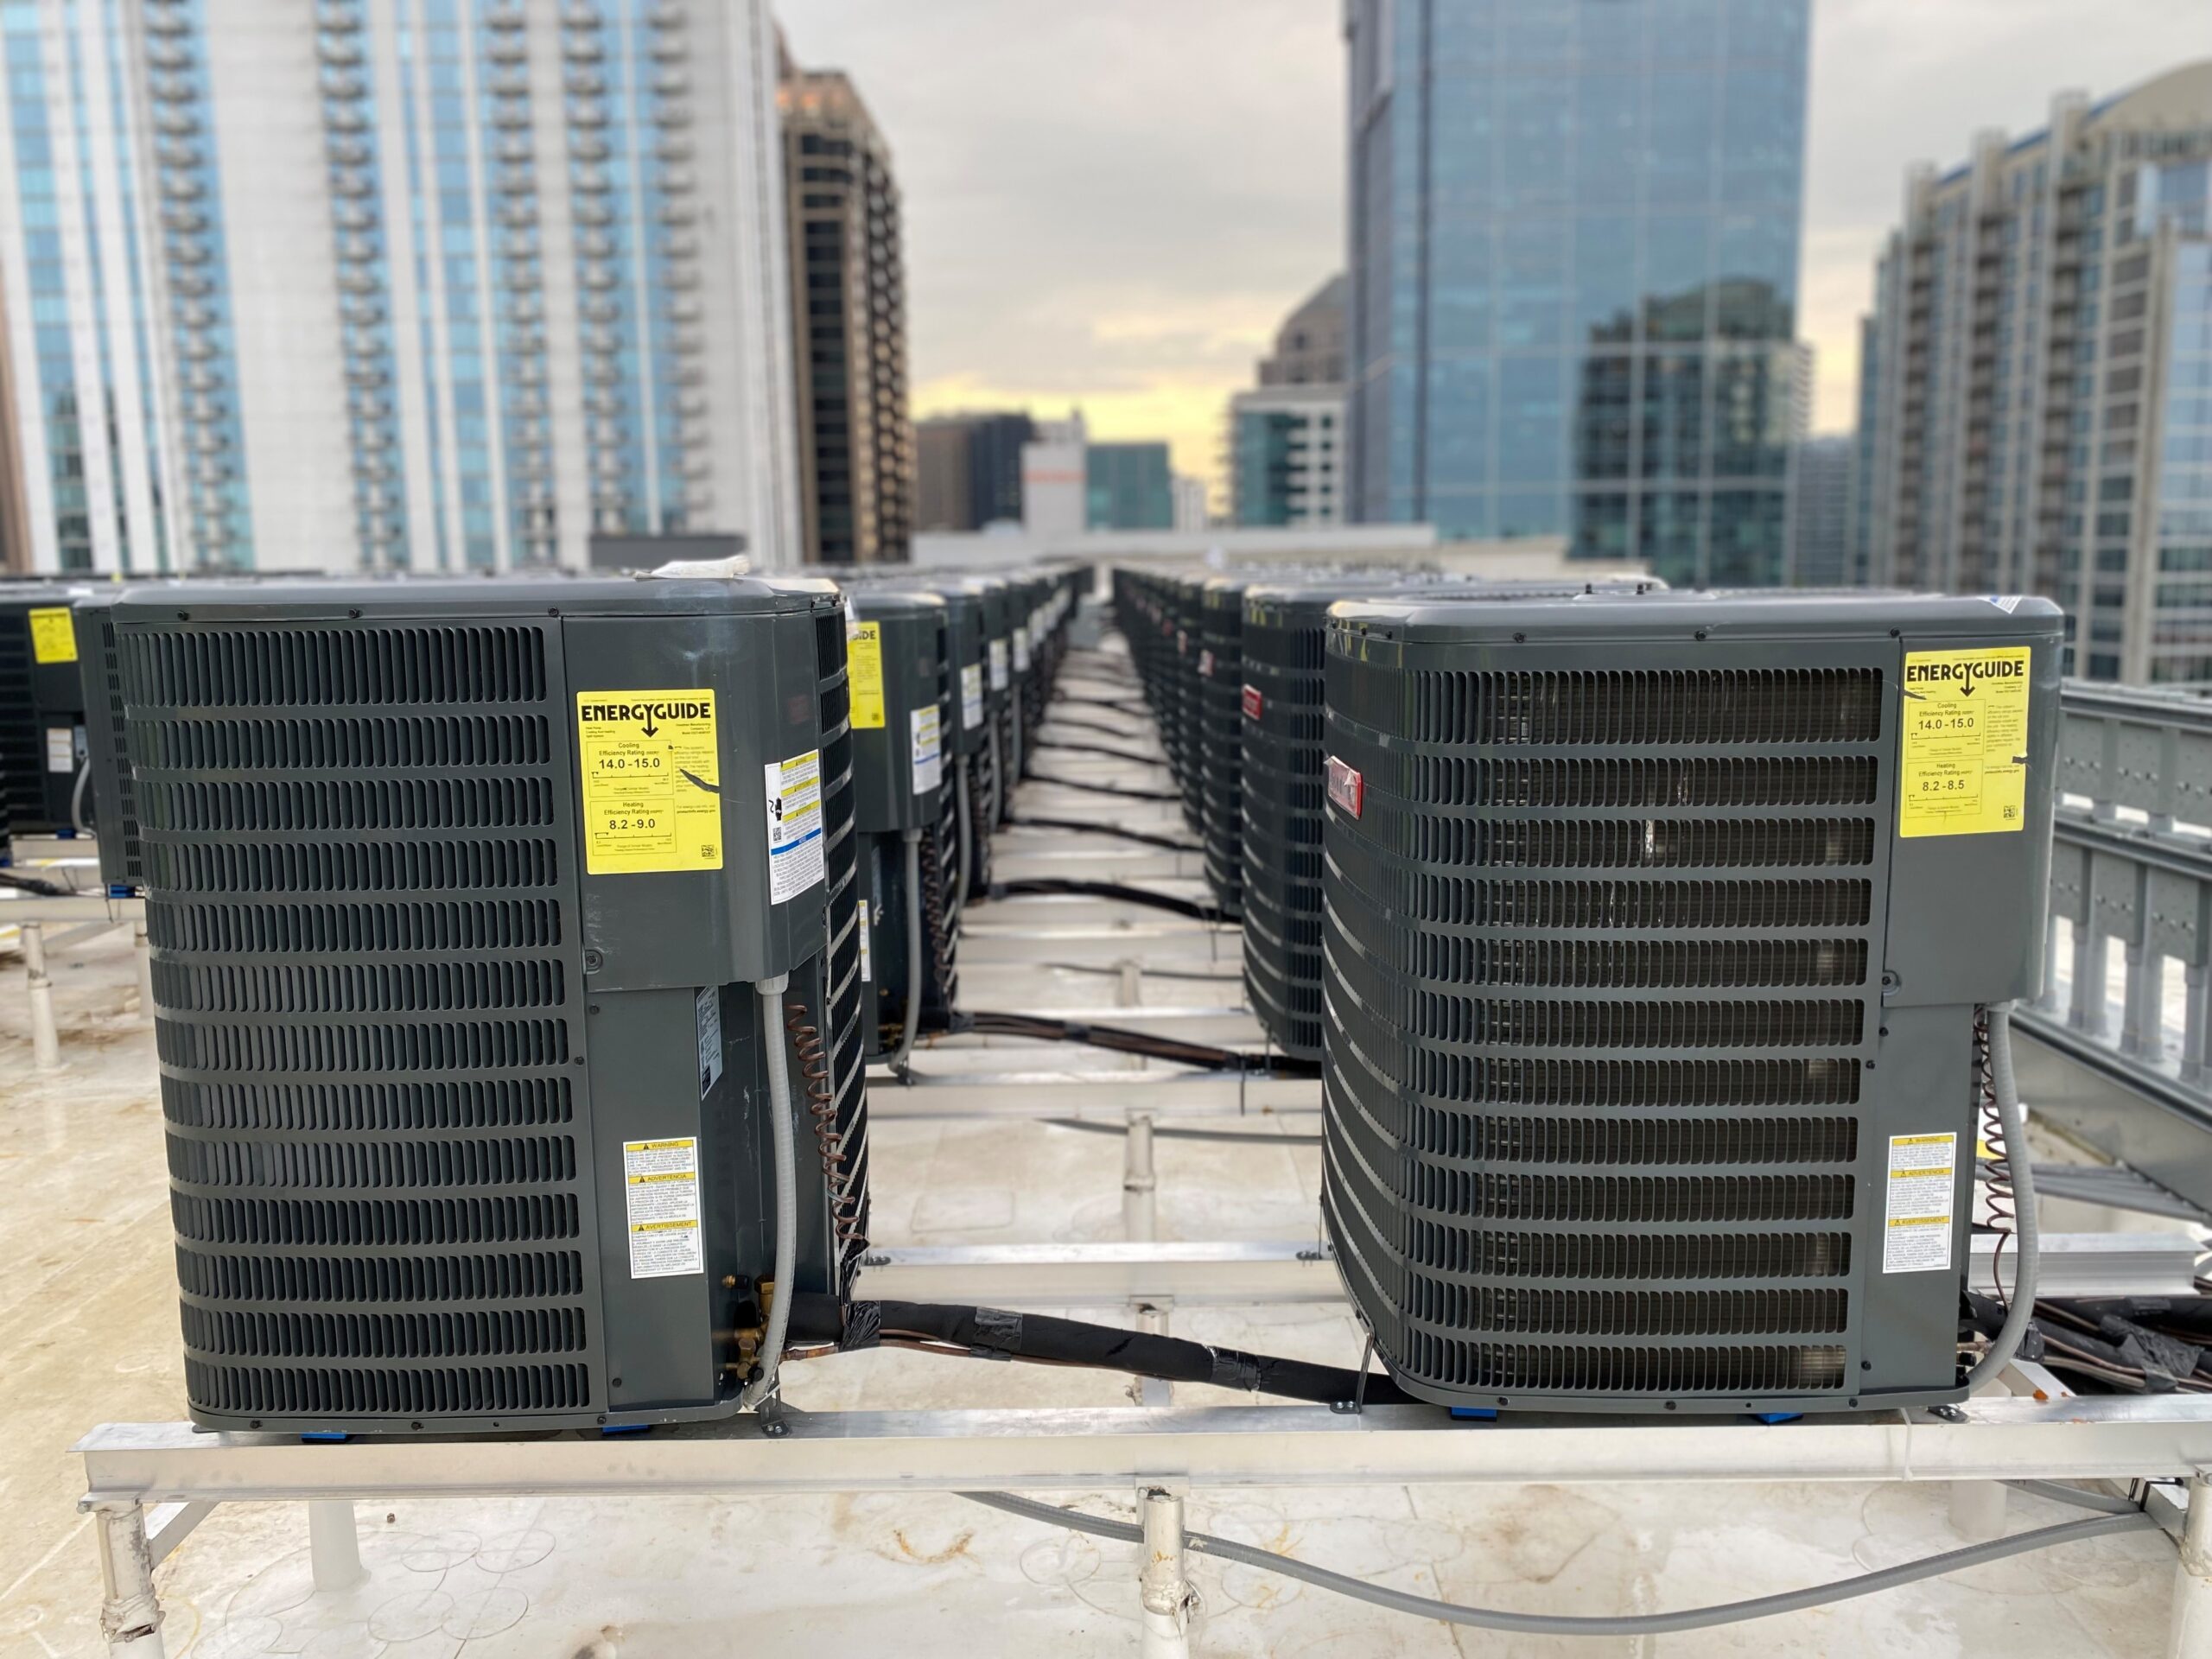 HVAC units on business building rooftop